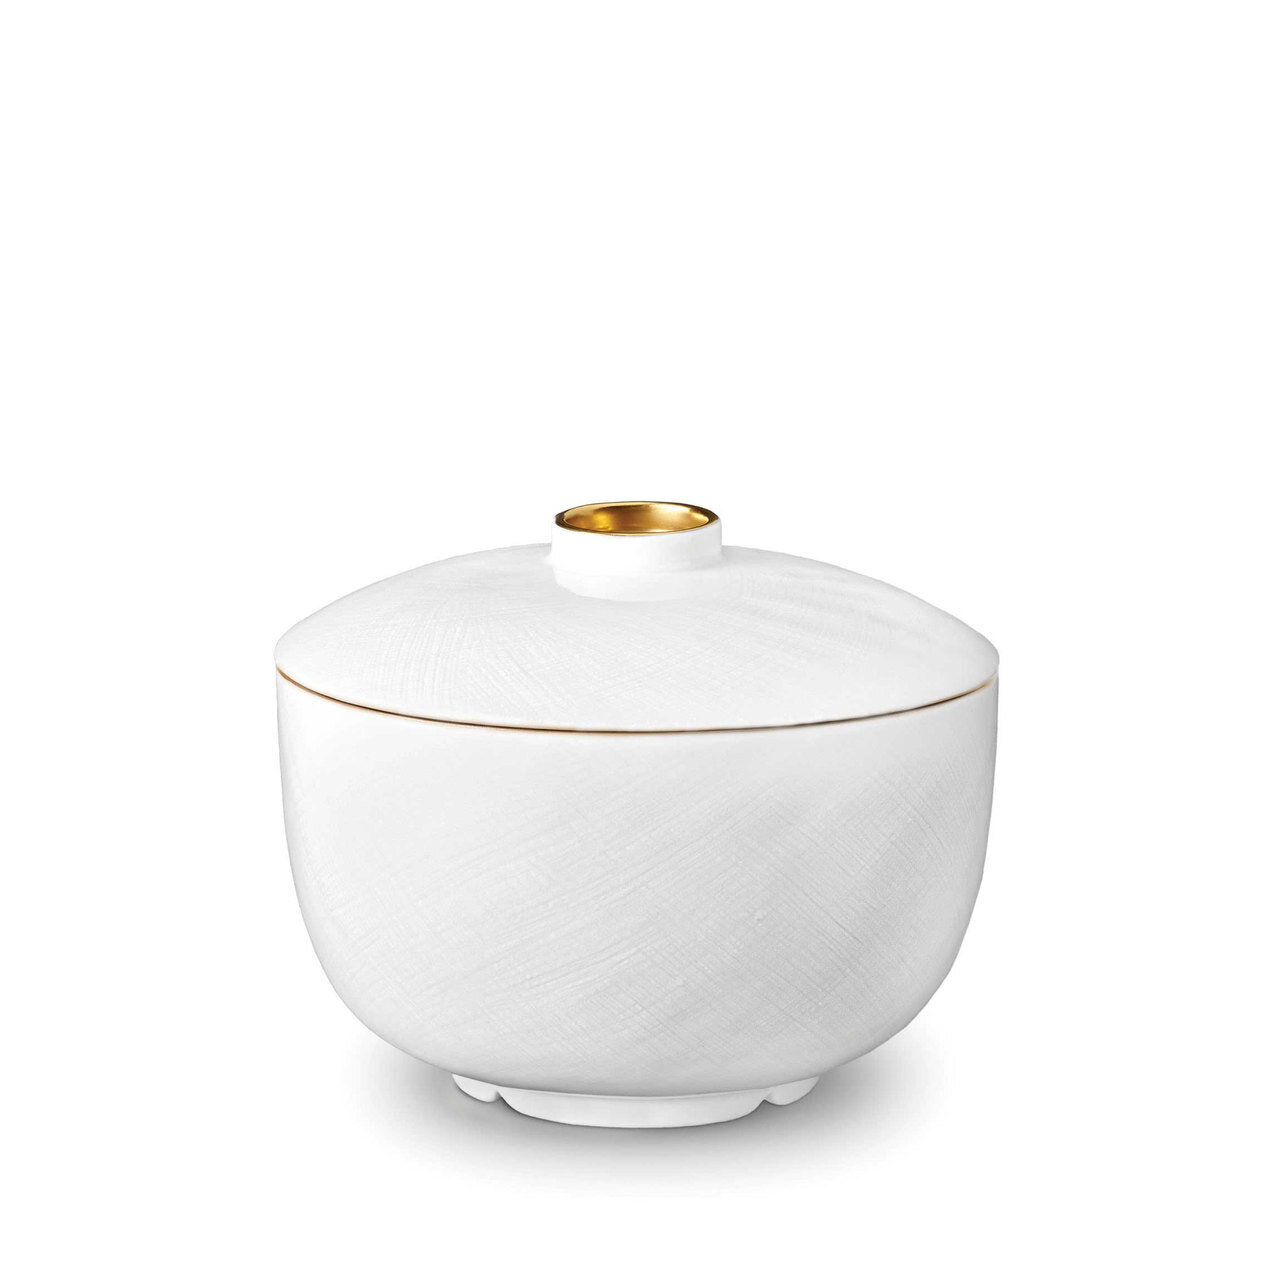 L'Objet Han Rice Bowl with Lid Gold